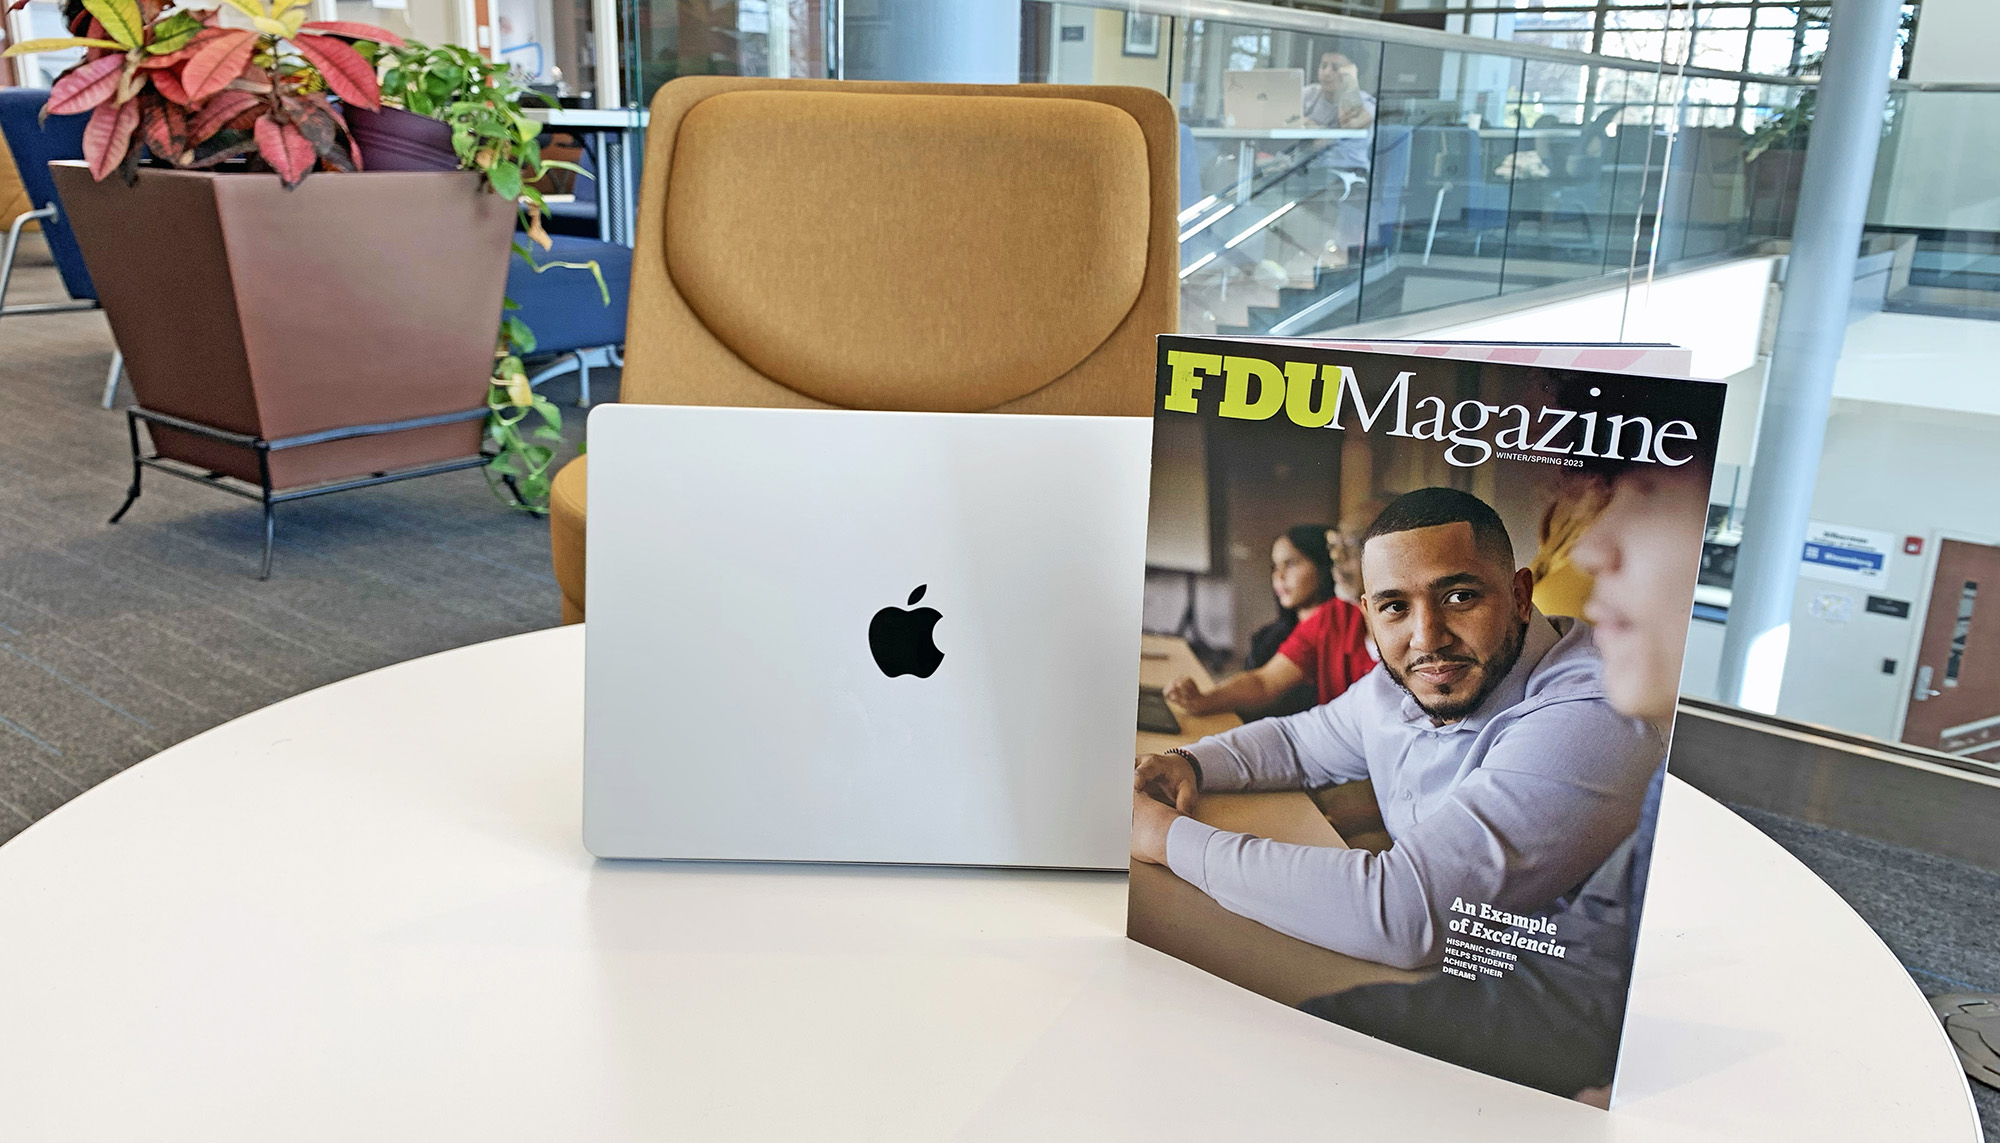 A Macbook and a copy of FDU Magazine sit on a table in the library.